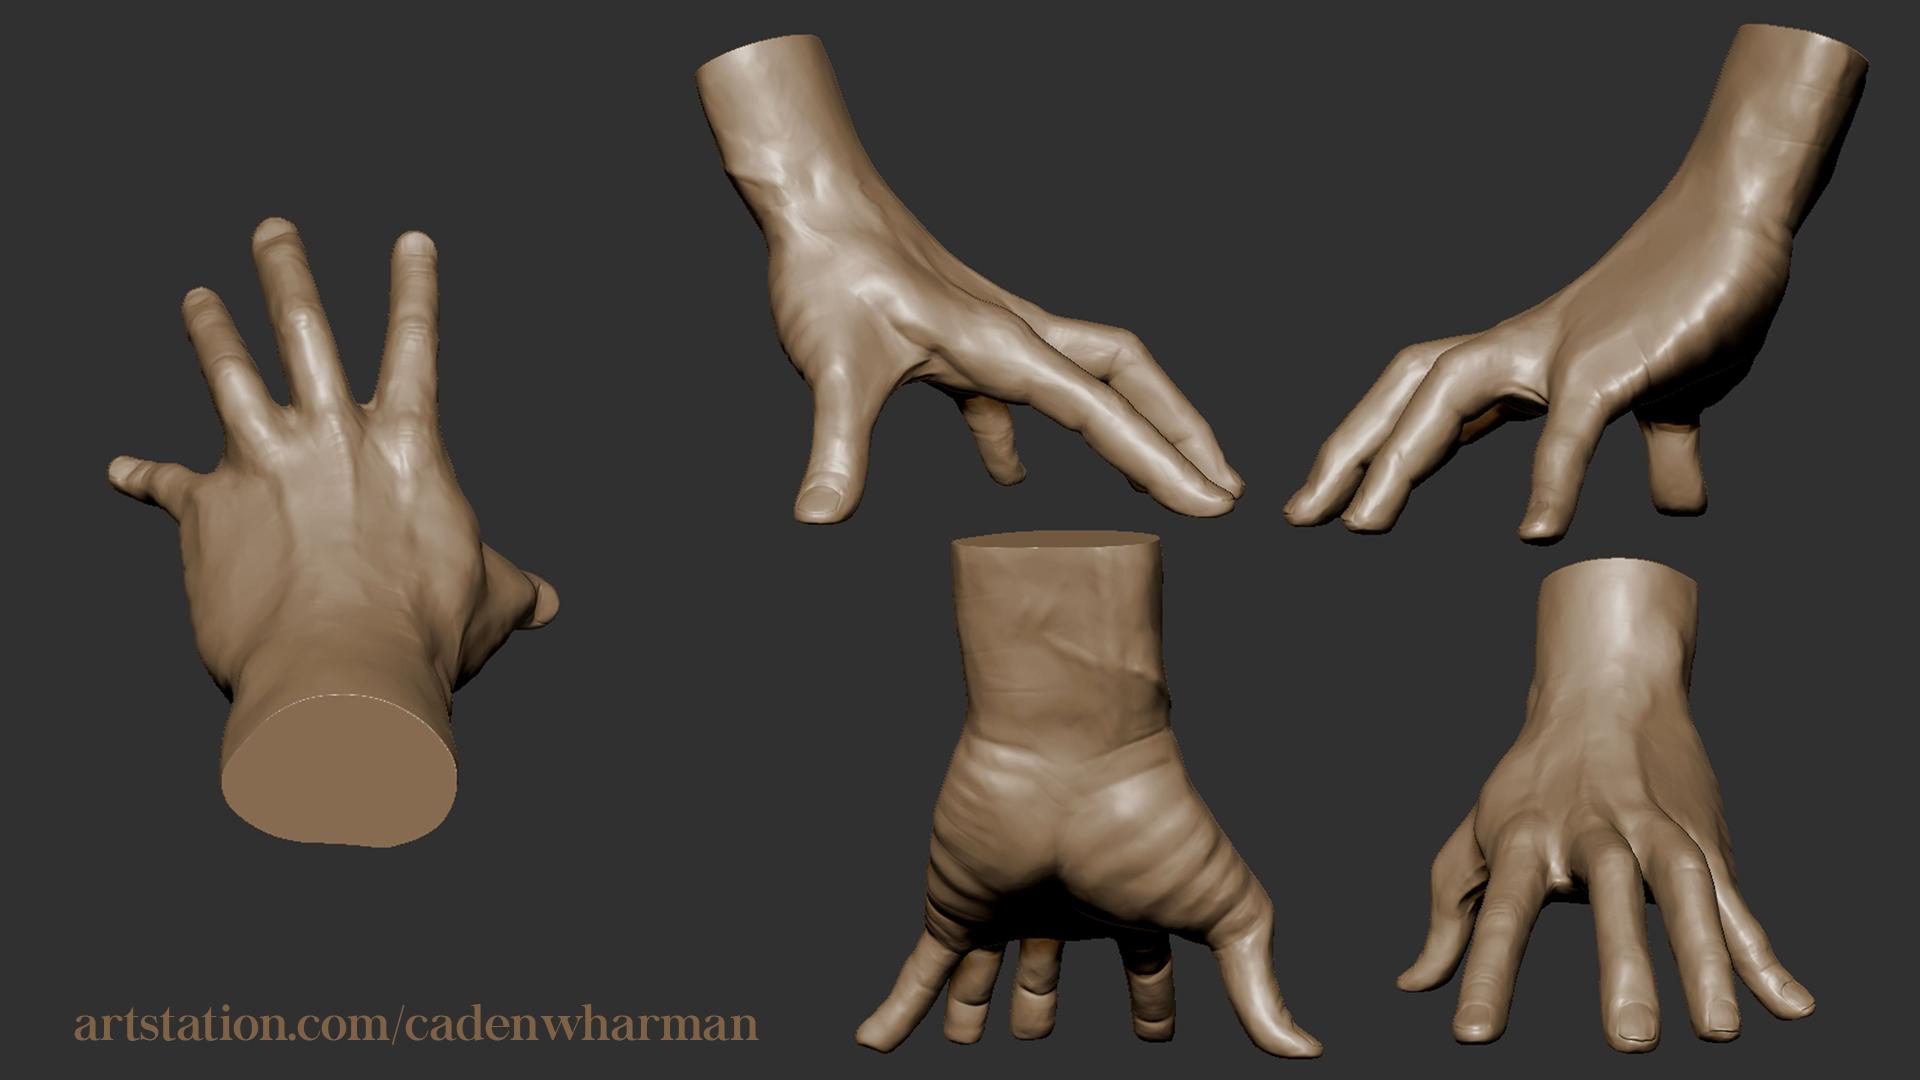 3D sculpted hand with fingers pressing down from multiple points of view by Caden Harman